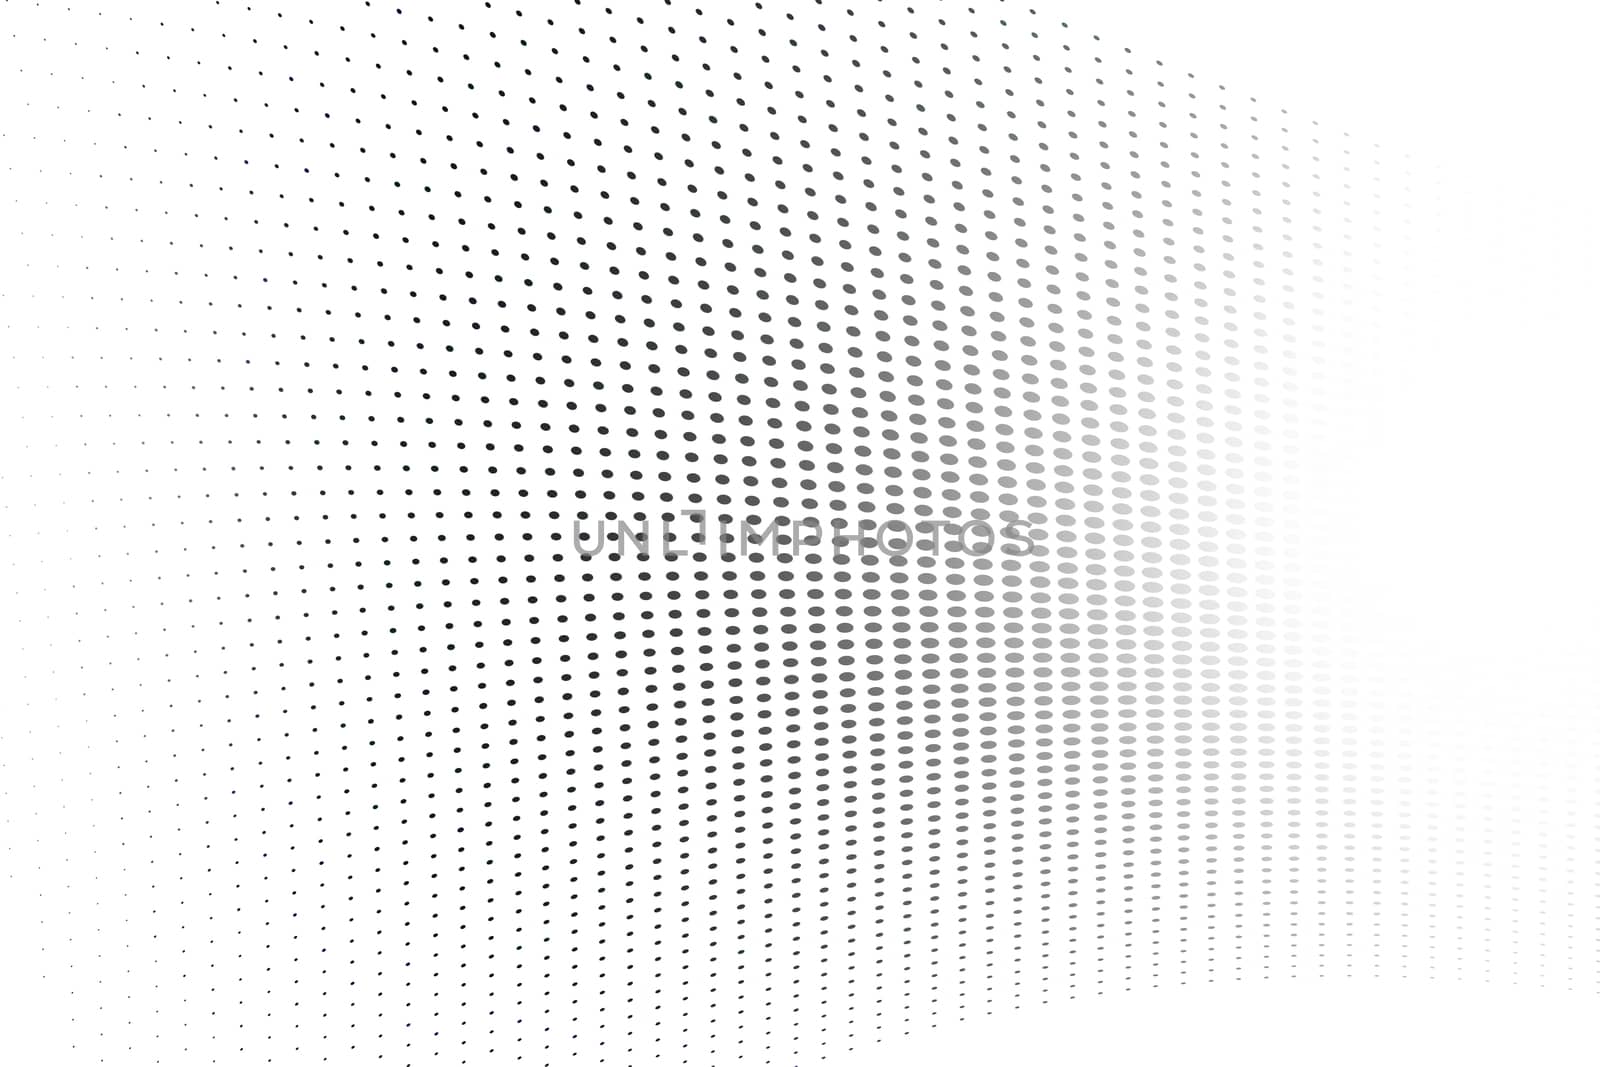 Background grey and white halftone at modern bright art. Blurred pattern raster effect. Abstract creative graphic template. Business and Technology style.